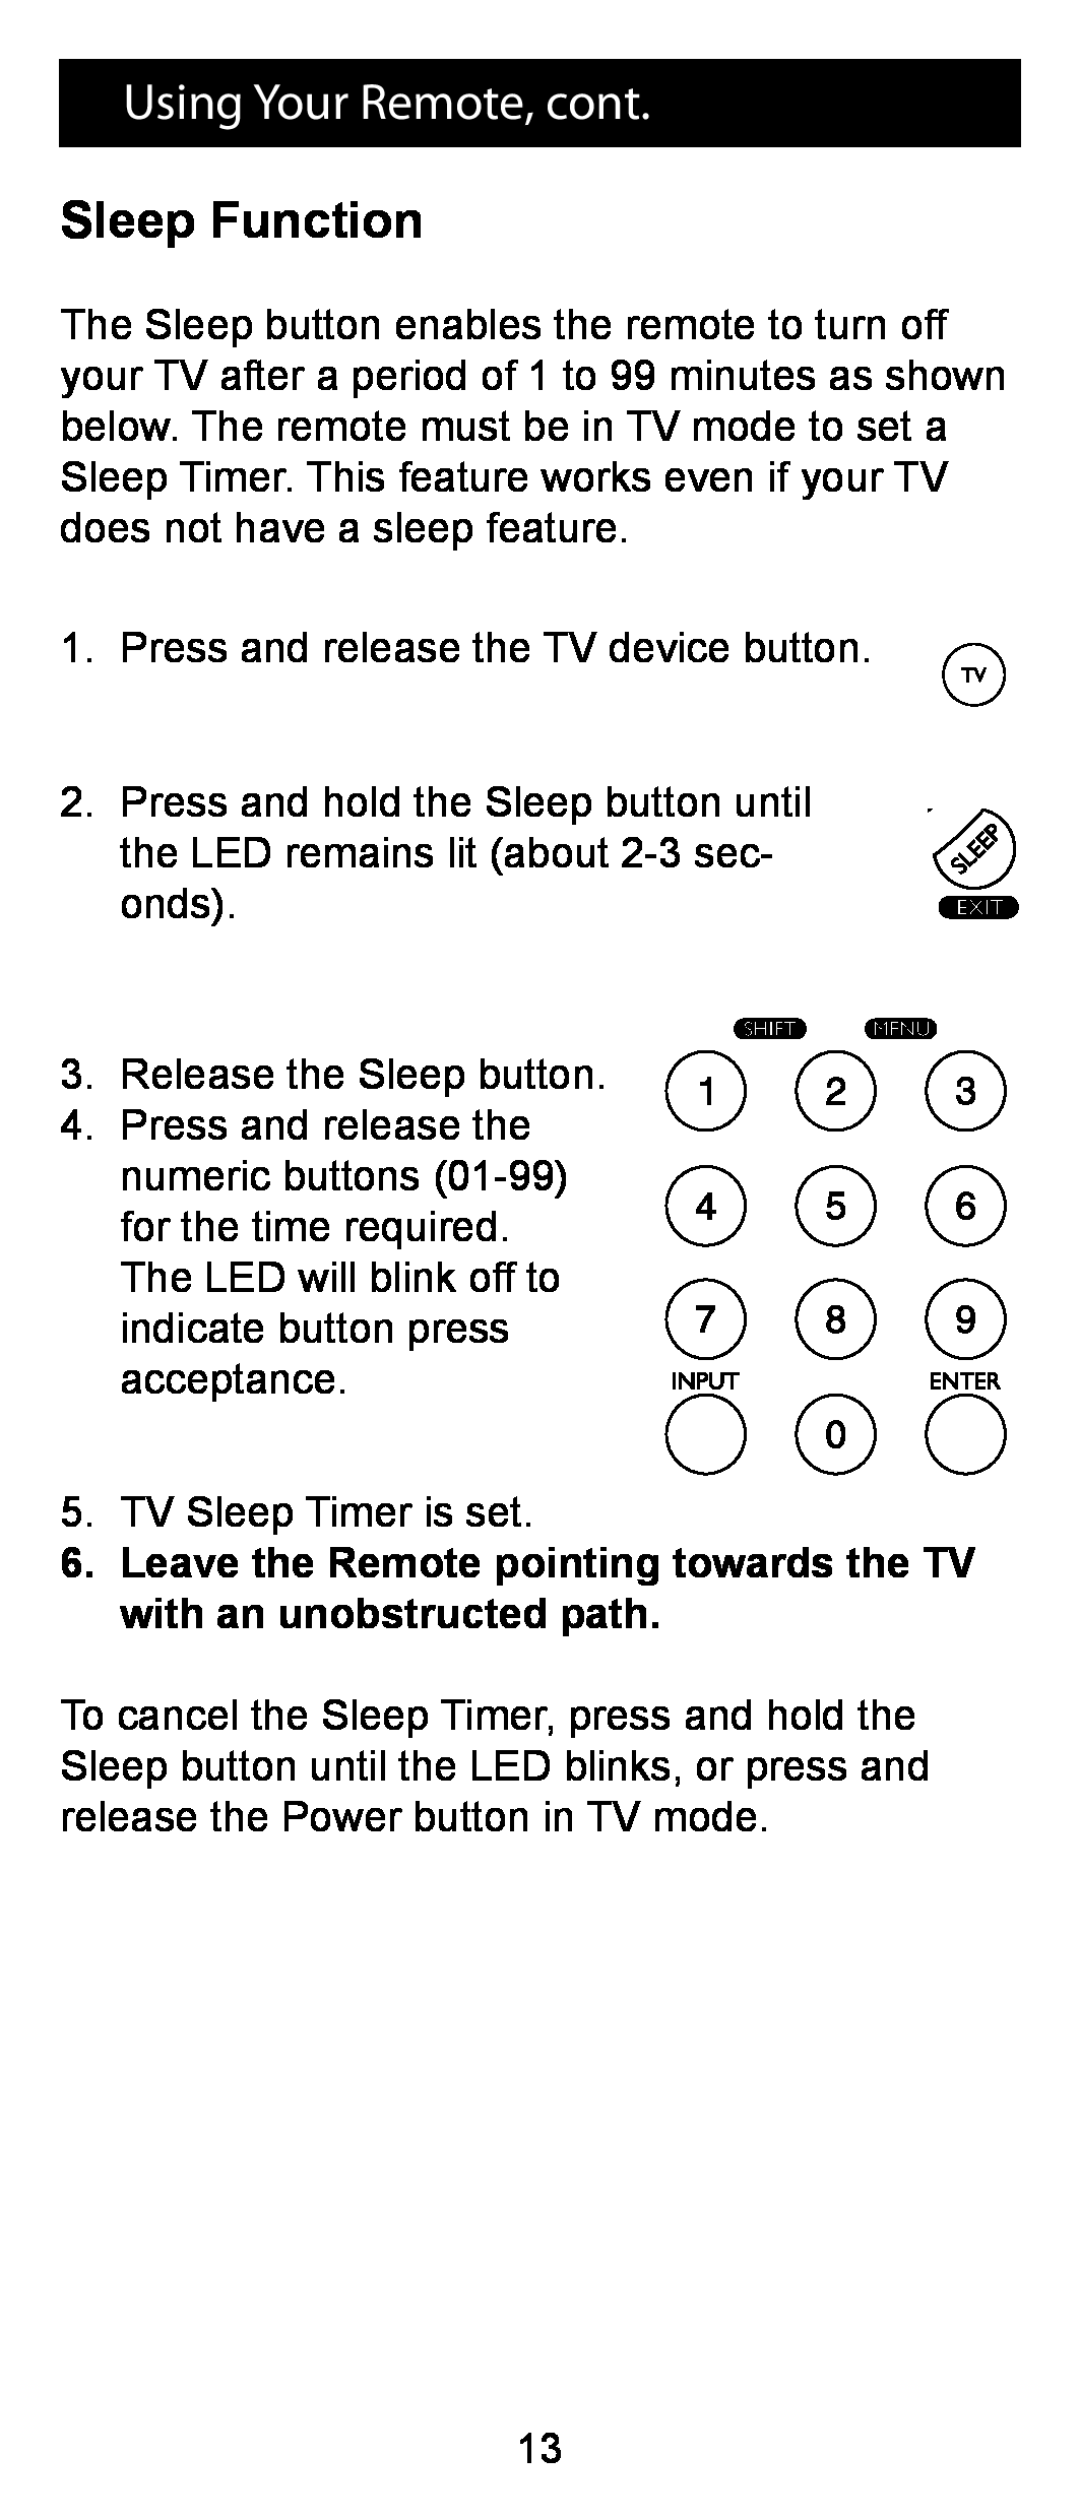 Jasco RM24993 Sleep Function, Using Your Remote, cont, Leave the Remote pointing towards the TV with an unobstructed path 